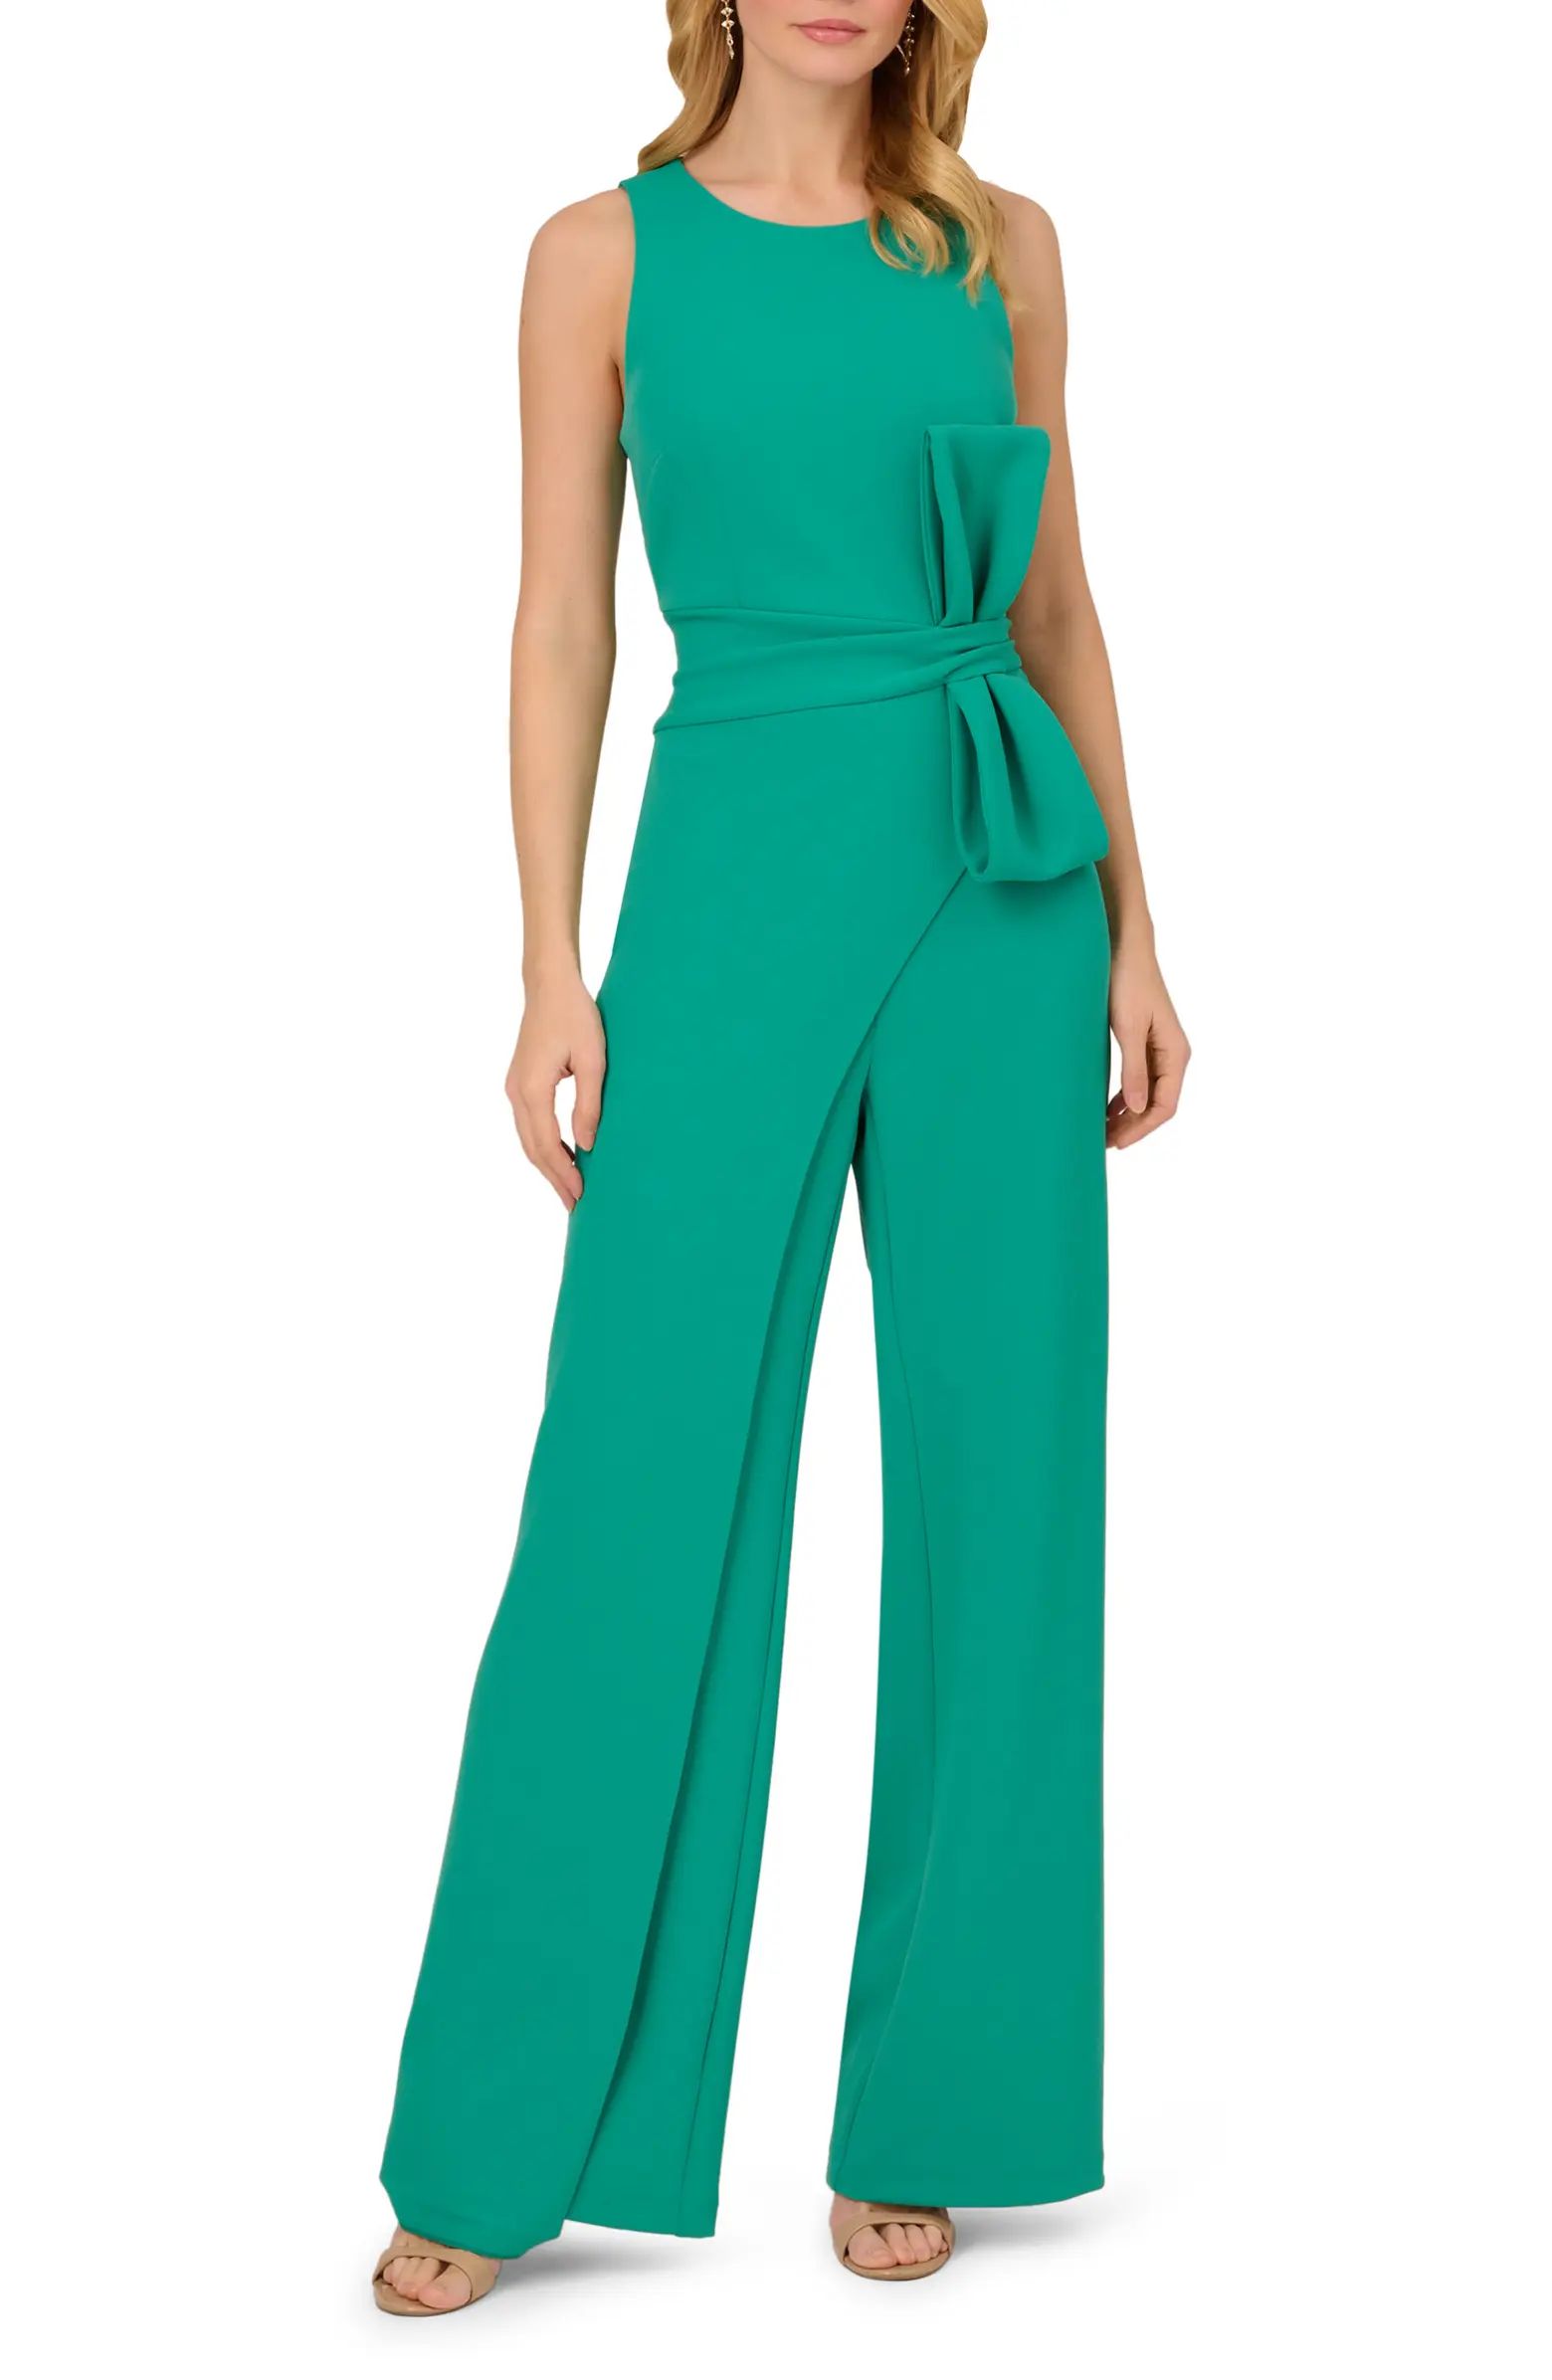 Adrianna Papell Bow Detail Sleeveless Wide Leg Jumpsuit | Nordstrom | Nordstrom